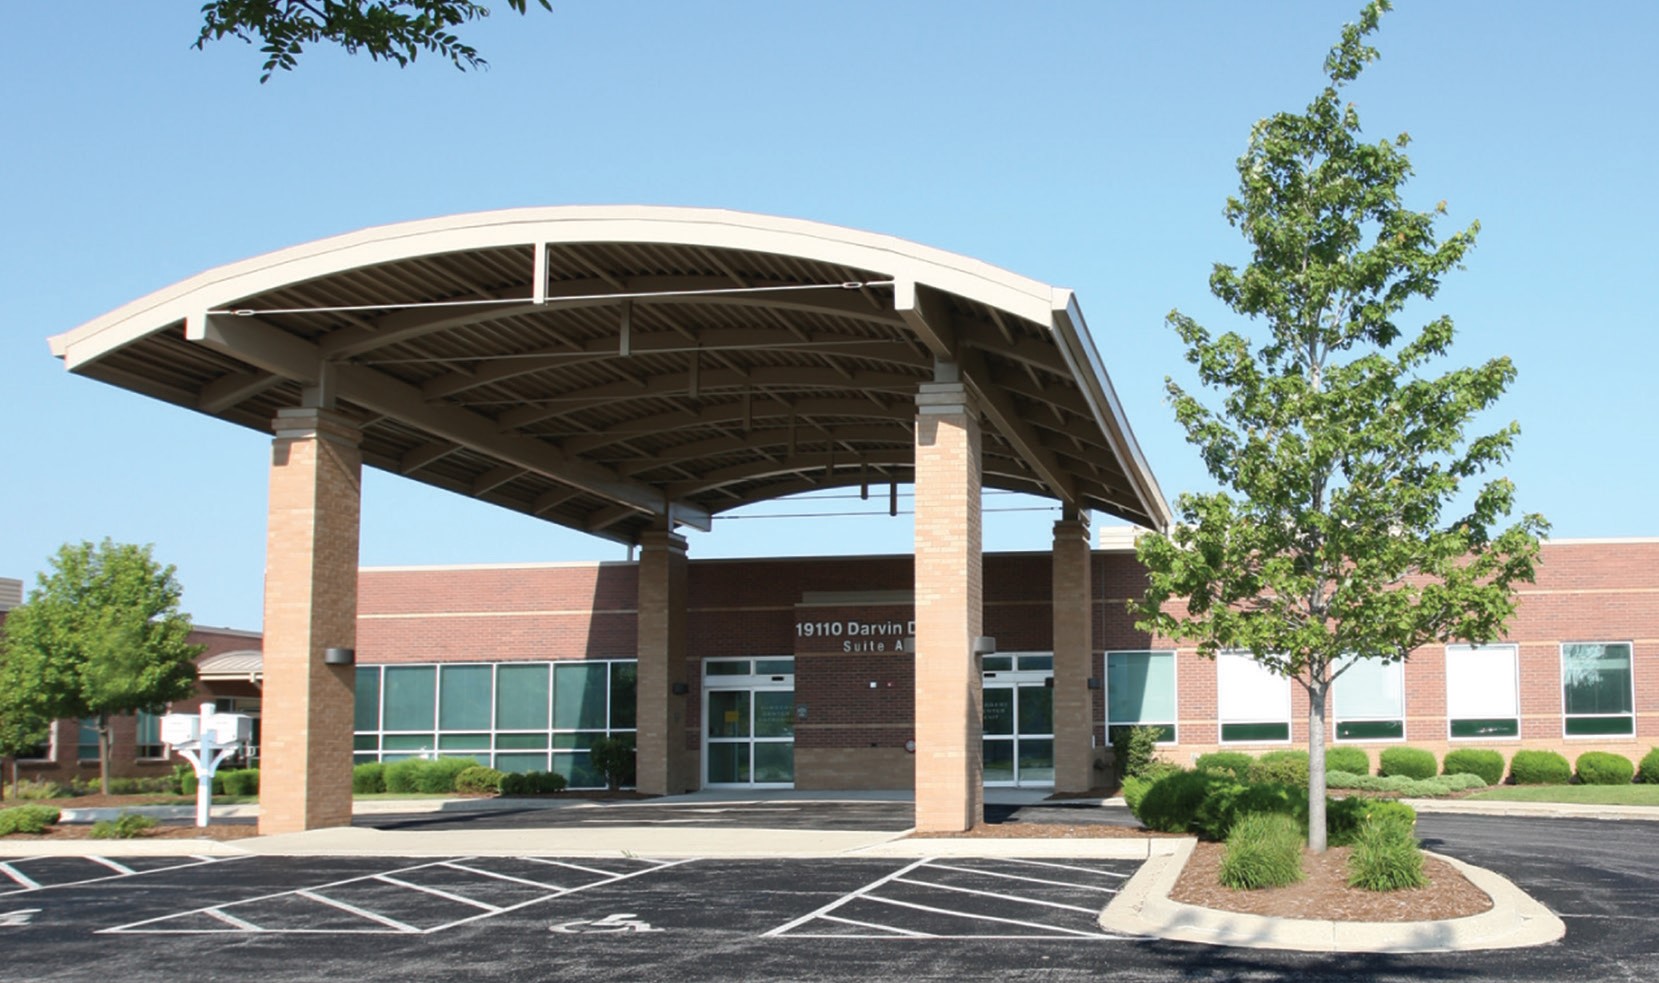 The Center for Minimally Invasive Surgery is a 28,334 square foot surgery center on 3.55 acres at 19110 Darvin Drive in Mokena, Ill. 